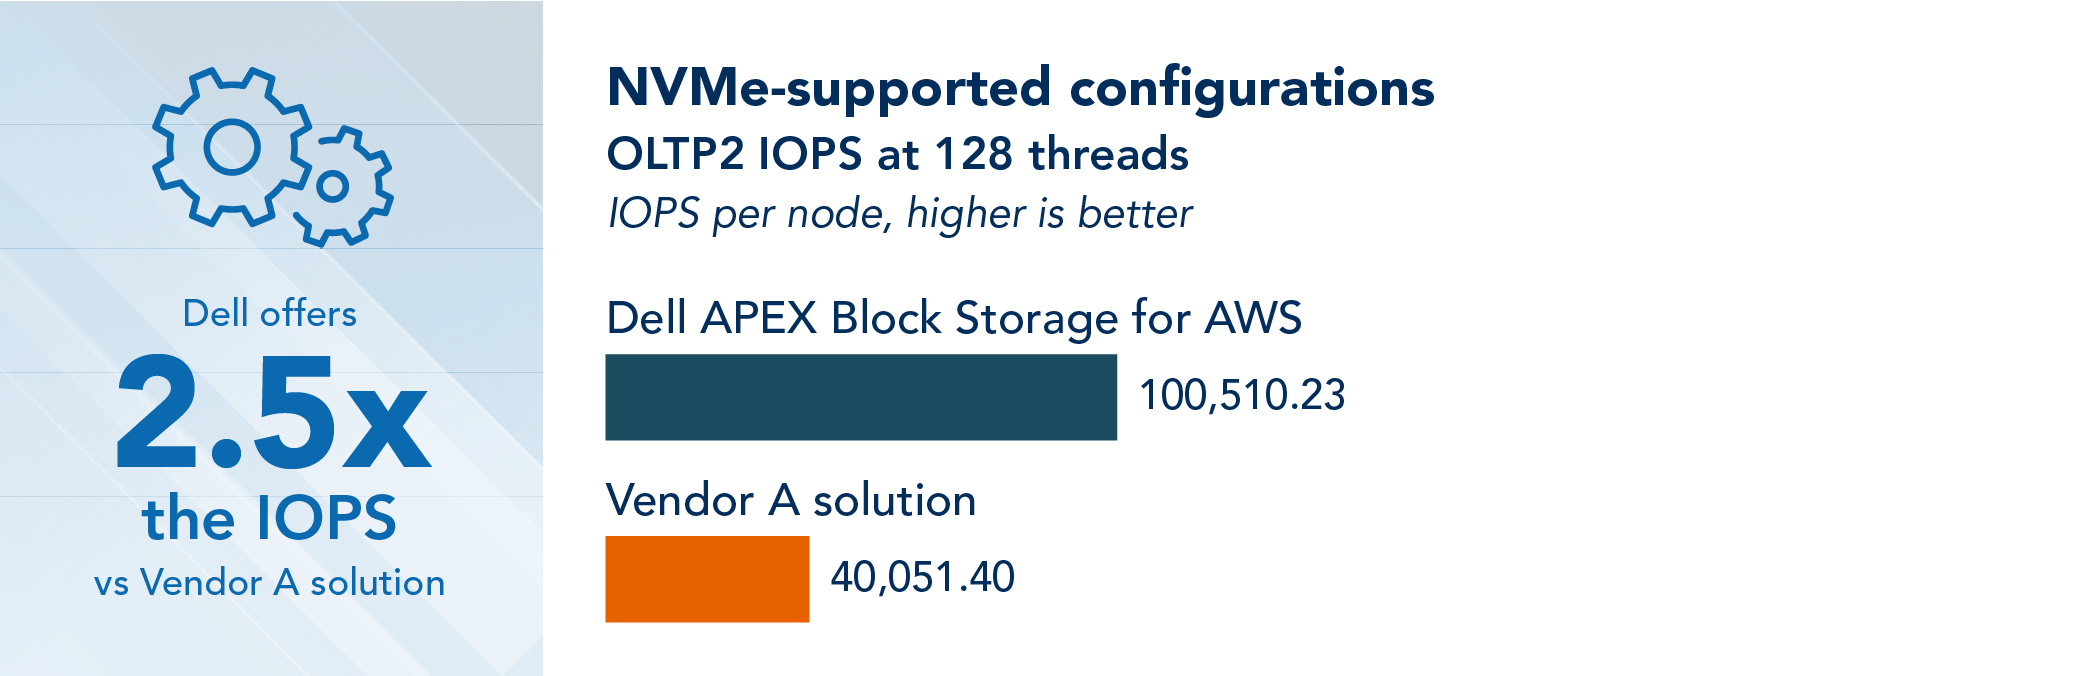 Comparison of OLTP2 IOPS at 128 threads for Dell APEX Block Storage for AWS and the Vendor A solution in their NVMe-supported configurations, where higher is better. Dell APEX Block Storage for AWS achieved 100,510.23 IOPS per node, and the Vendor A solution achieved 40,051.4 IOPS per node. Dell offers 2.5x the IOPS vs. Vendor A solution.